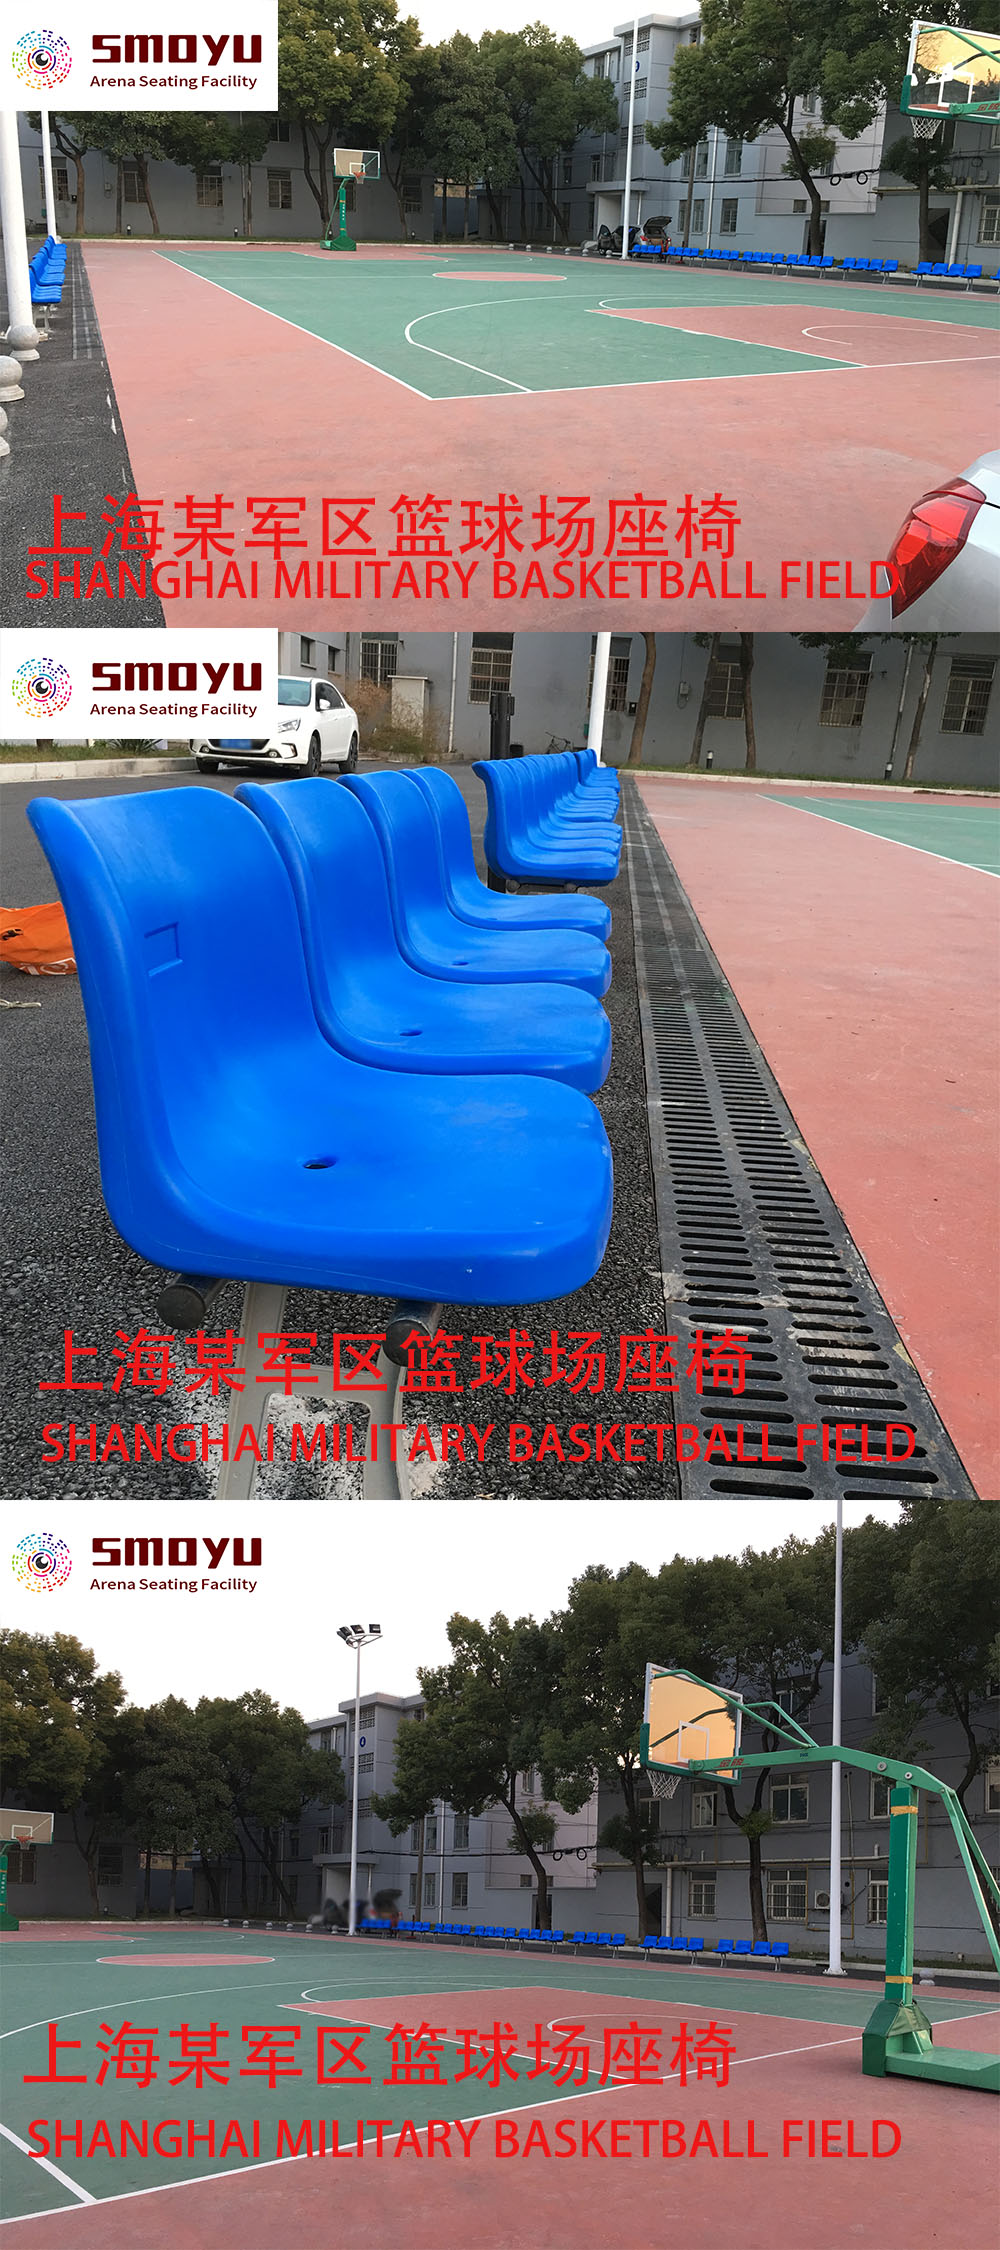 outdoor <a href=https://www.arena-seating.com/High-Back-rest-plastic-HDPE-material-stadium-seat-p.html target='_blank'>stadium seat</a>ing